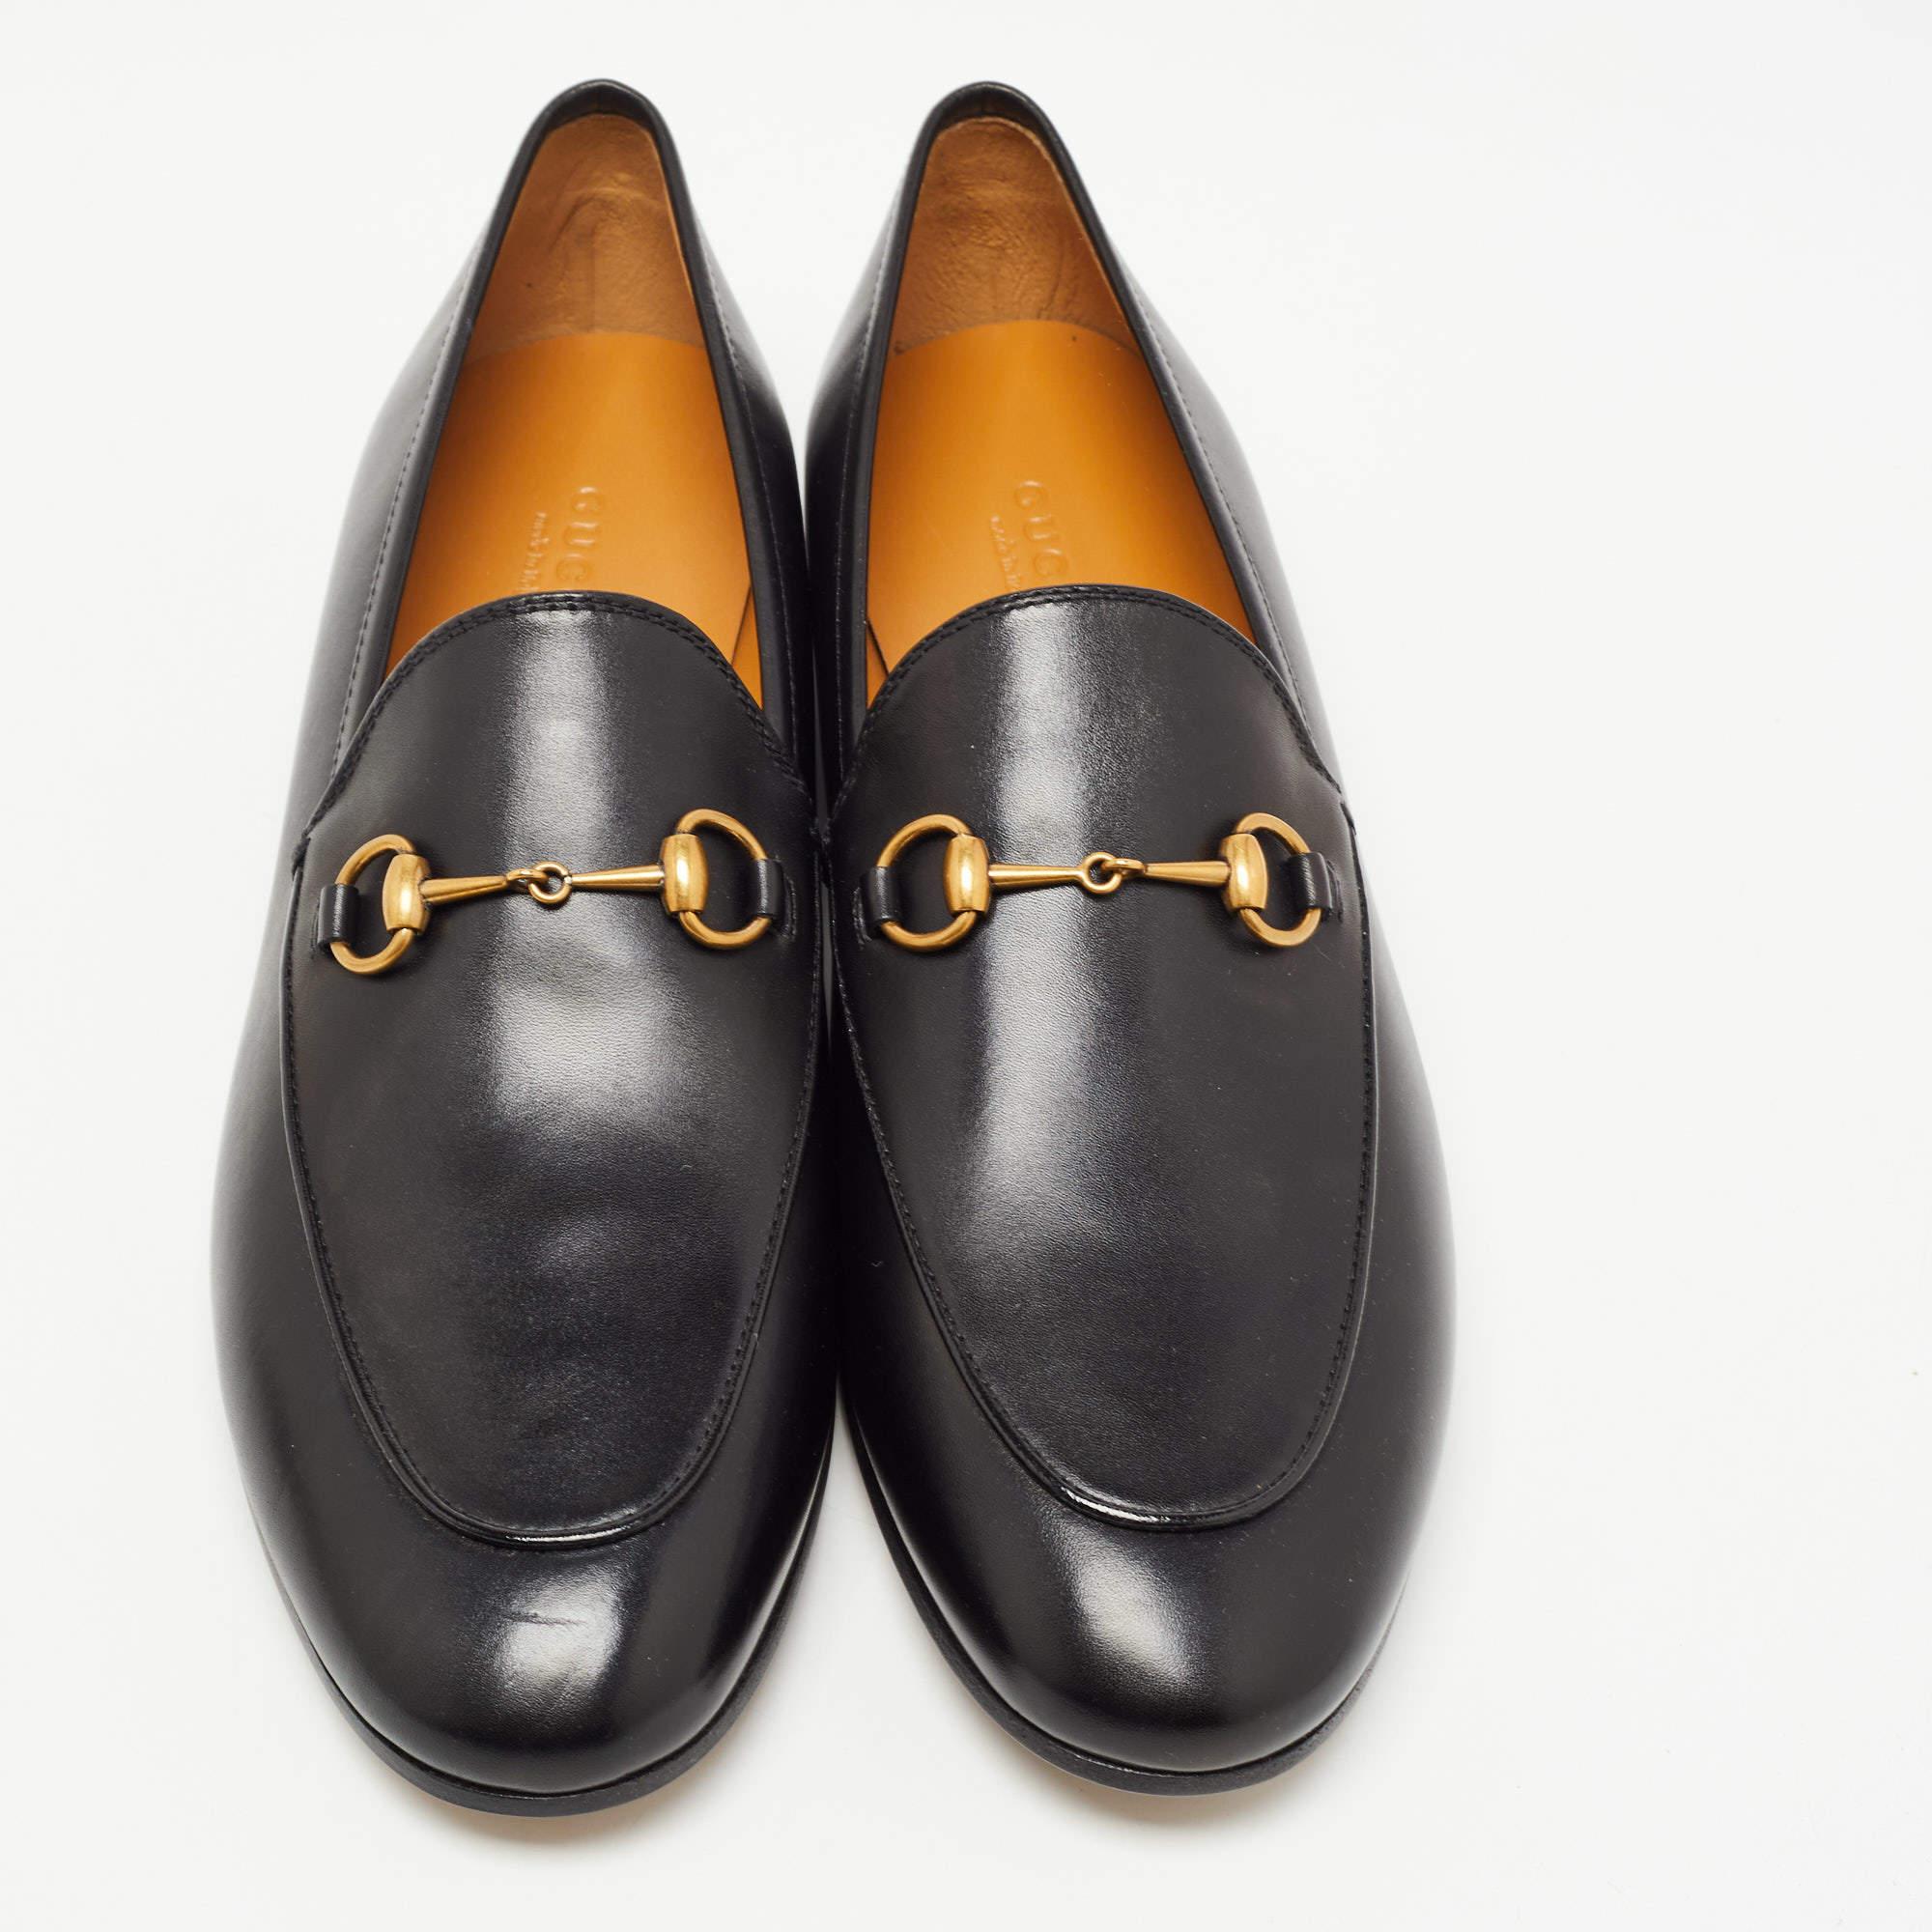 Let comfort and effortless style be yours with these loafers from Gucci. Crafted in black leather, the loafers feature beautiful uppers, durable soles, and a comfortable fit.

Includes: Original Box

